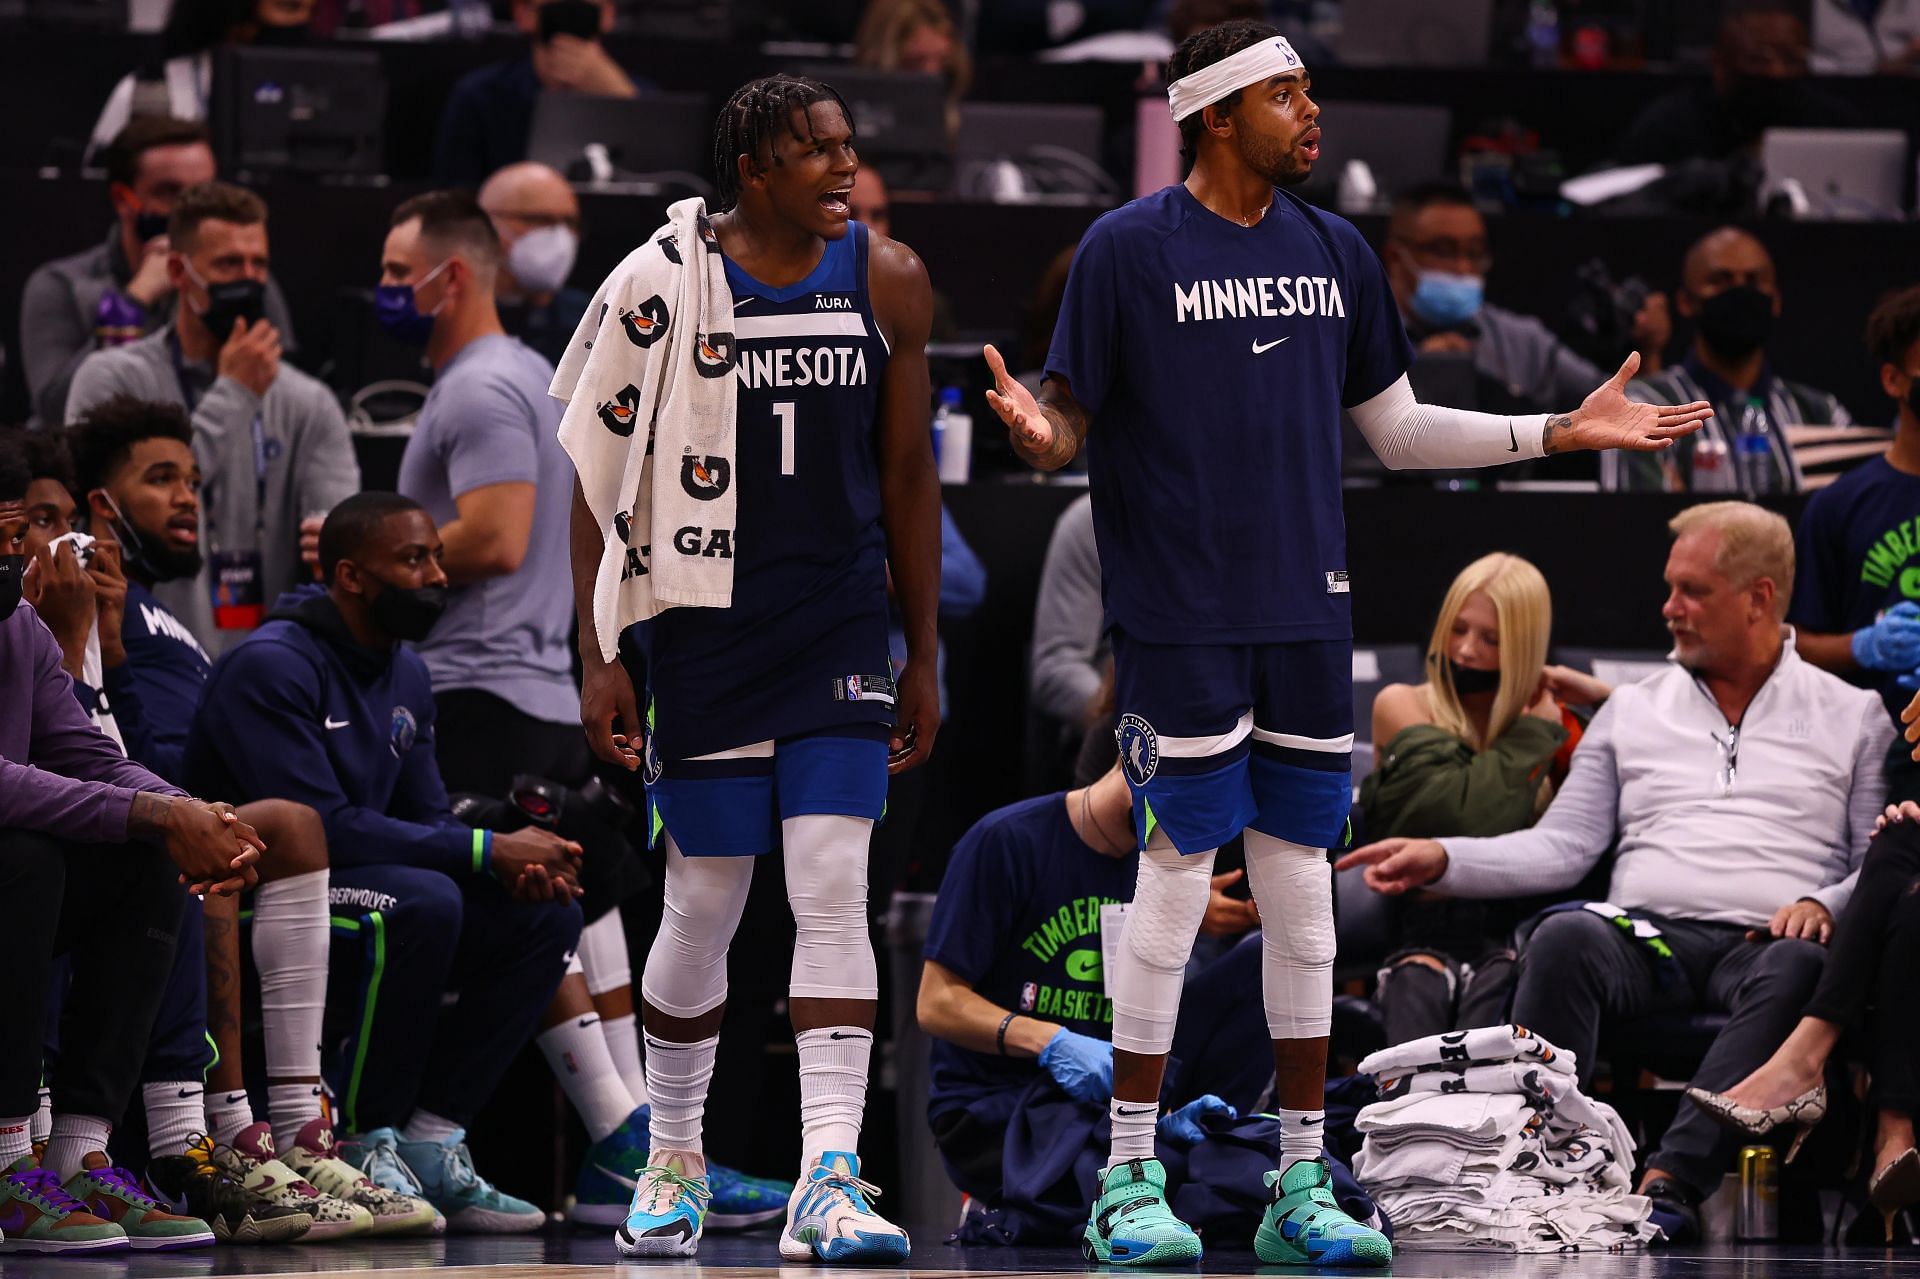 Players of the Minnesota Timberwolves react during a game.